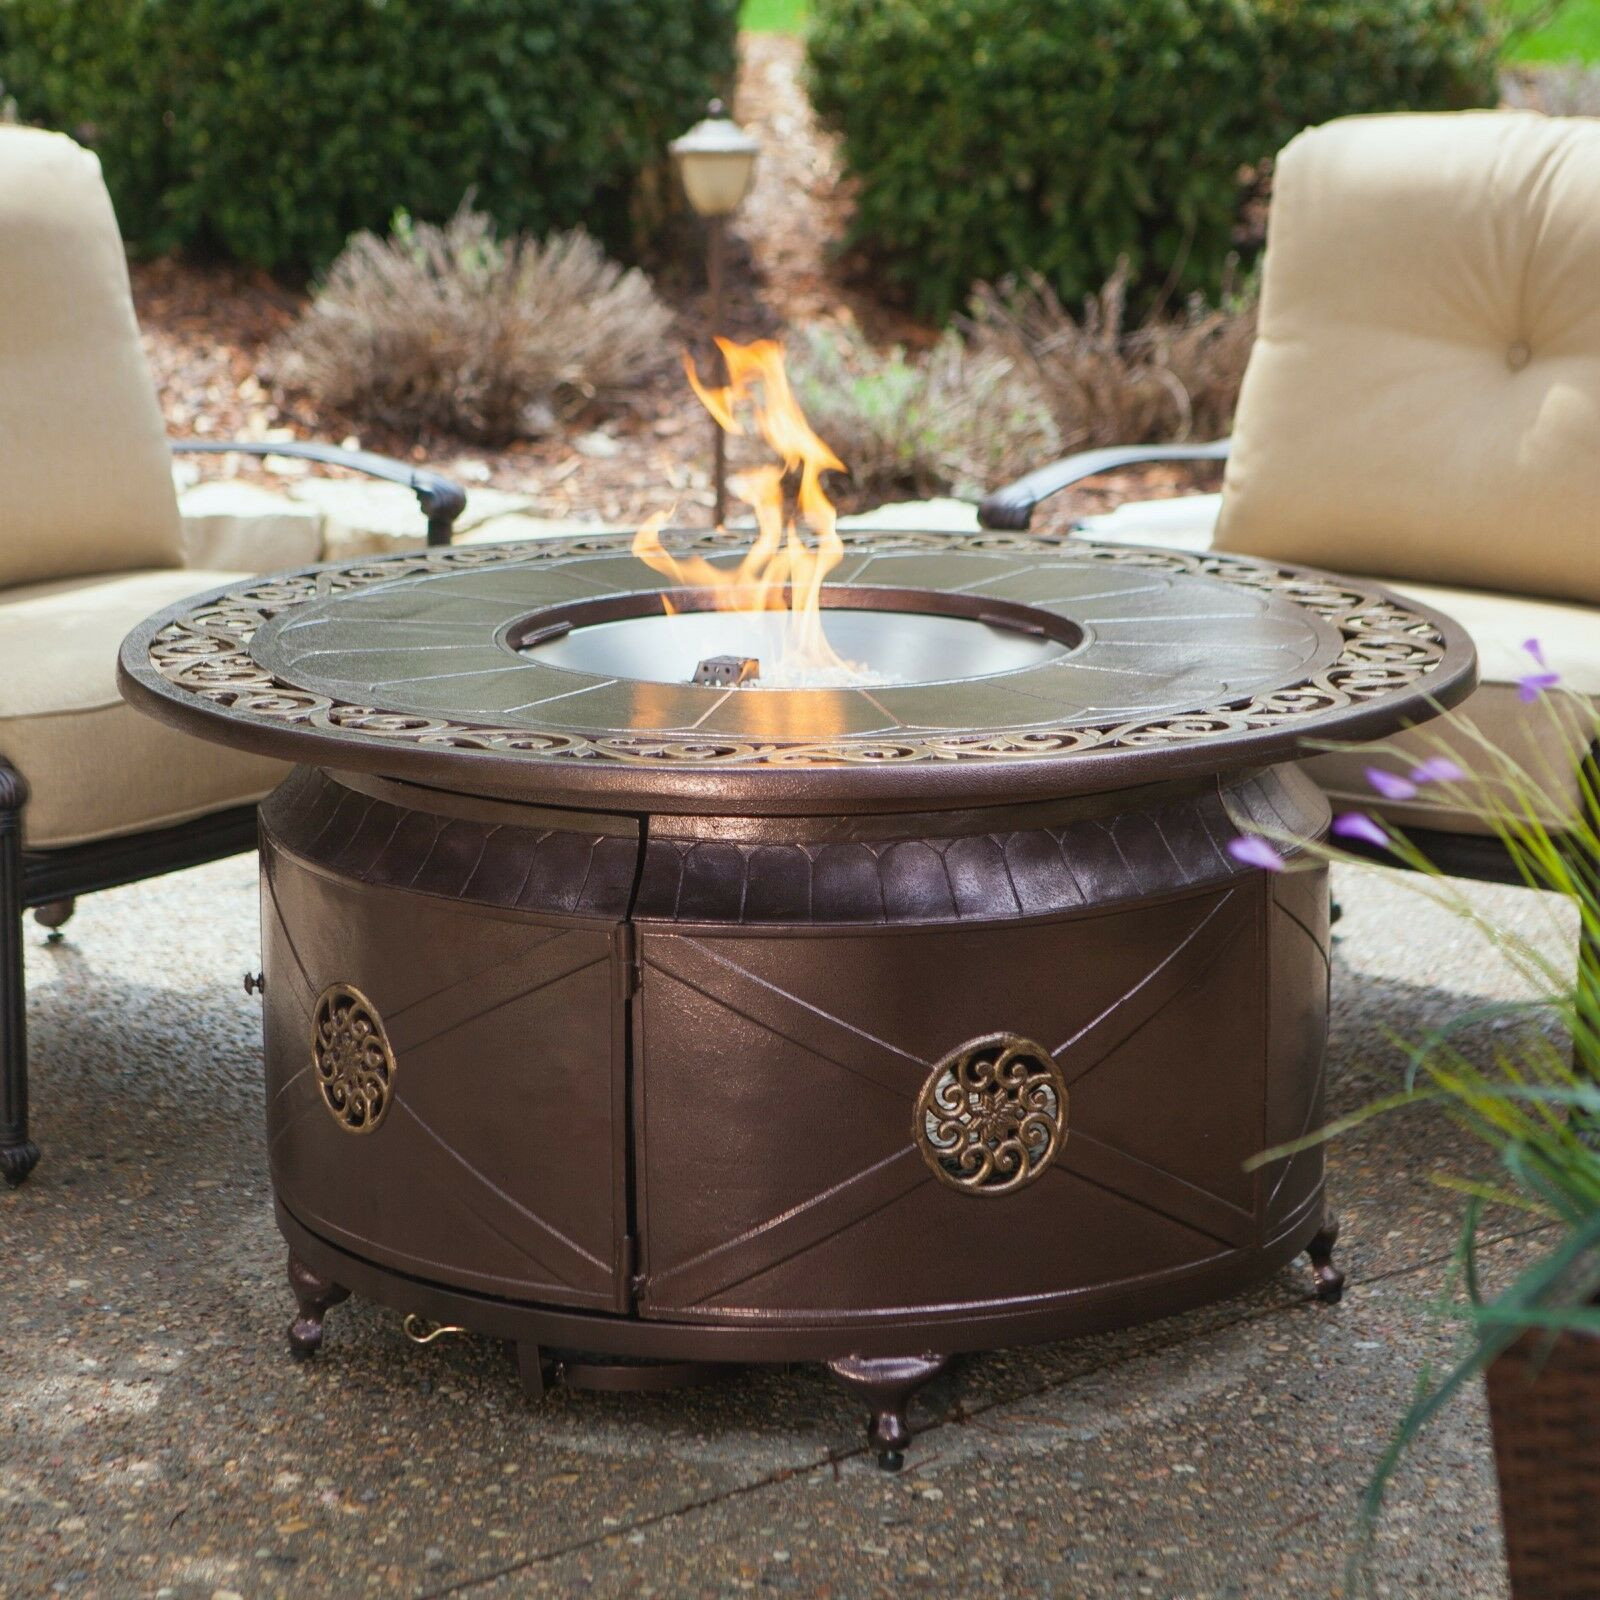 Patio Table With Firepit
 Fire Pit Table Burner Patio Deck Outdoor Fireplace Propane